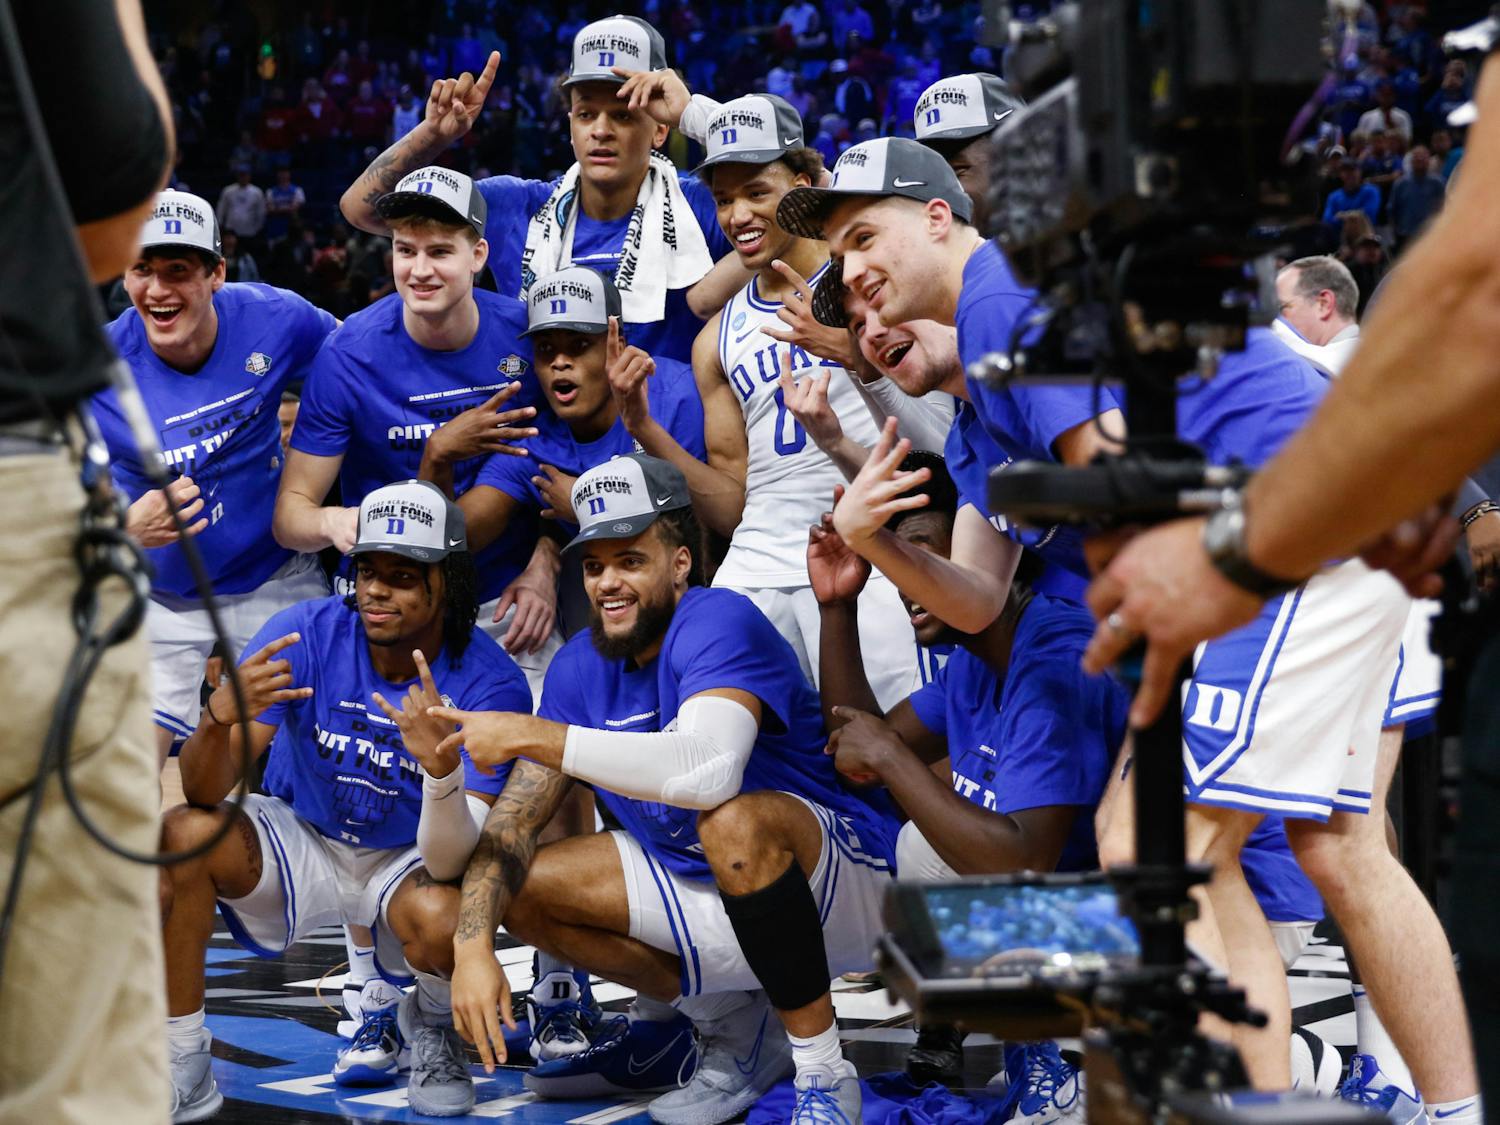 The Blue Devils became the West Regional Champion after defeating Arkansas in the Elite Eight. 